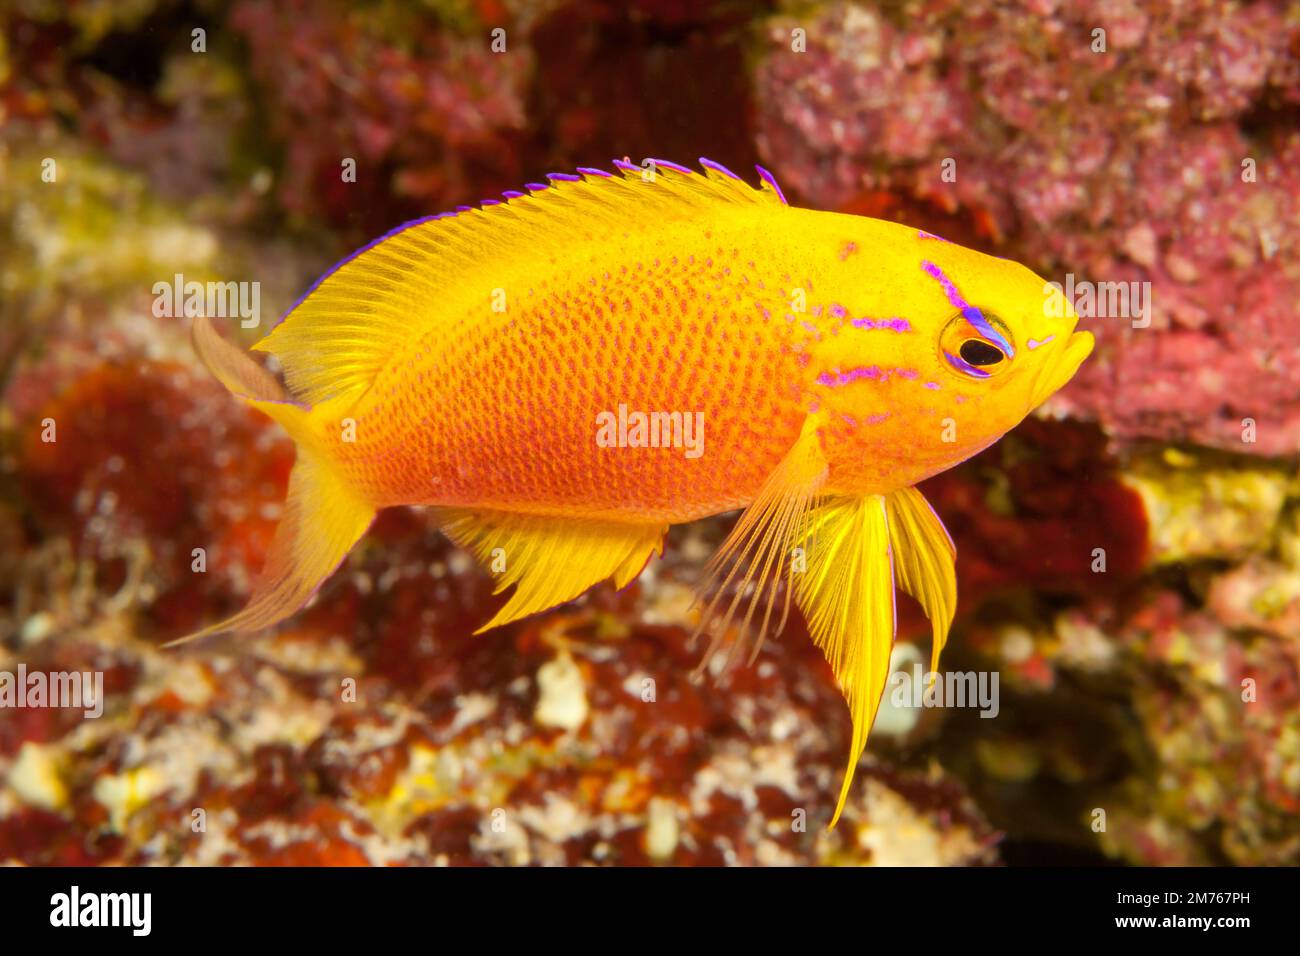 A female Hawaiian longfin anthias, Pseudanthias hawaiiensis, Hawaii. This species is uncommon in Hawaii where it is endemic. Stock Photo